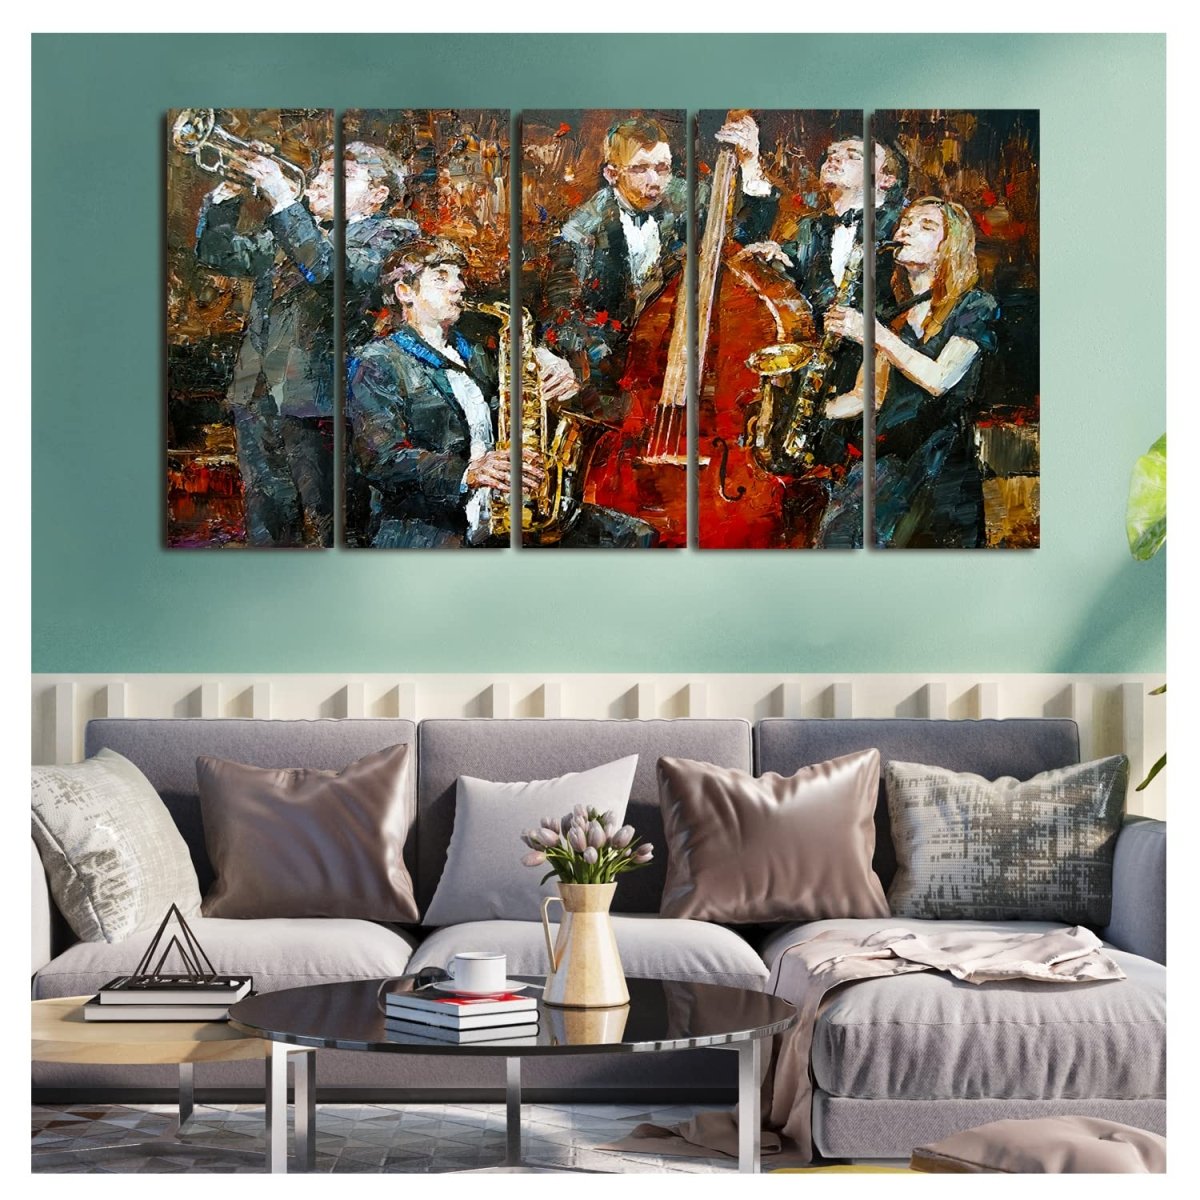 Metalkart Special Band of Maestro Wall Painting (Set of 5)